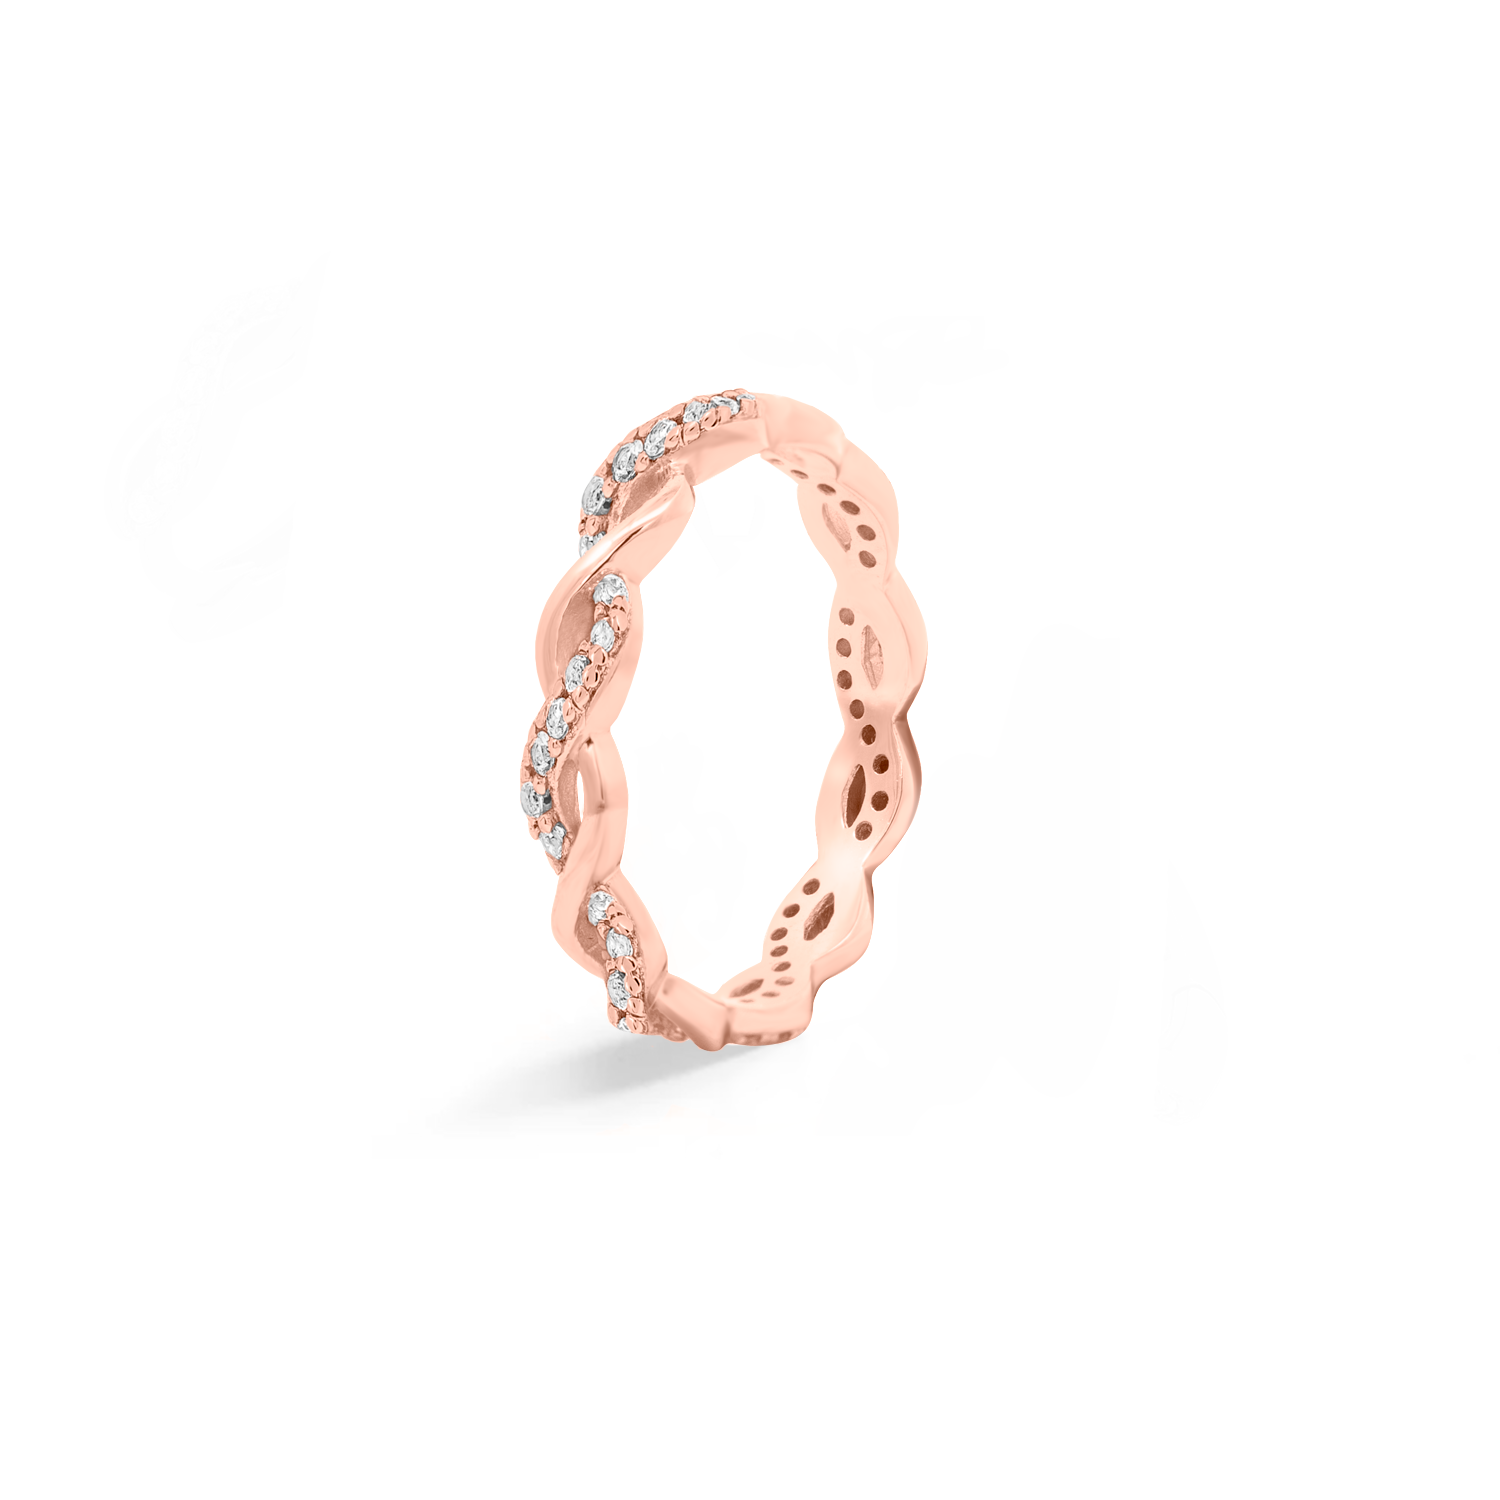 Effortless and graceful ring in rose gold with cubic zirconia.